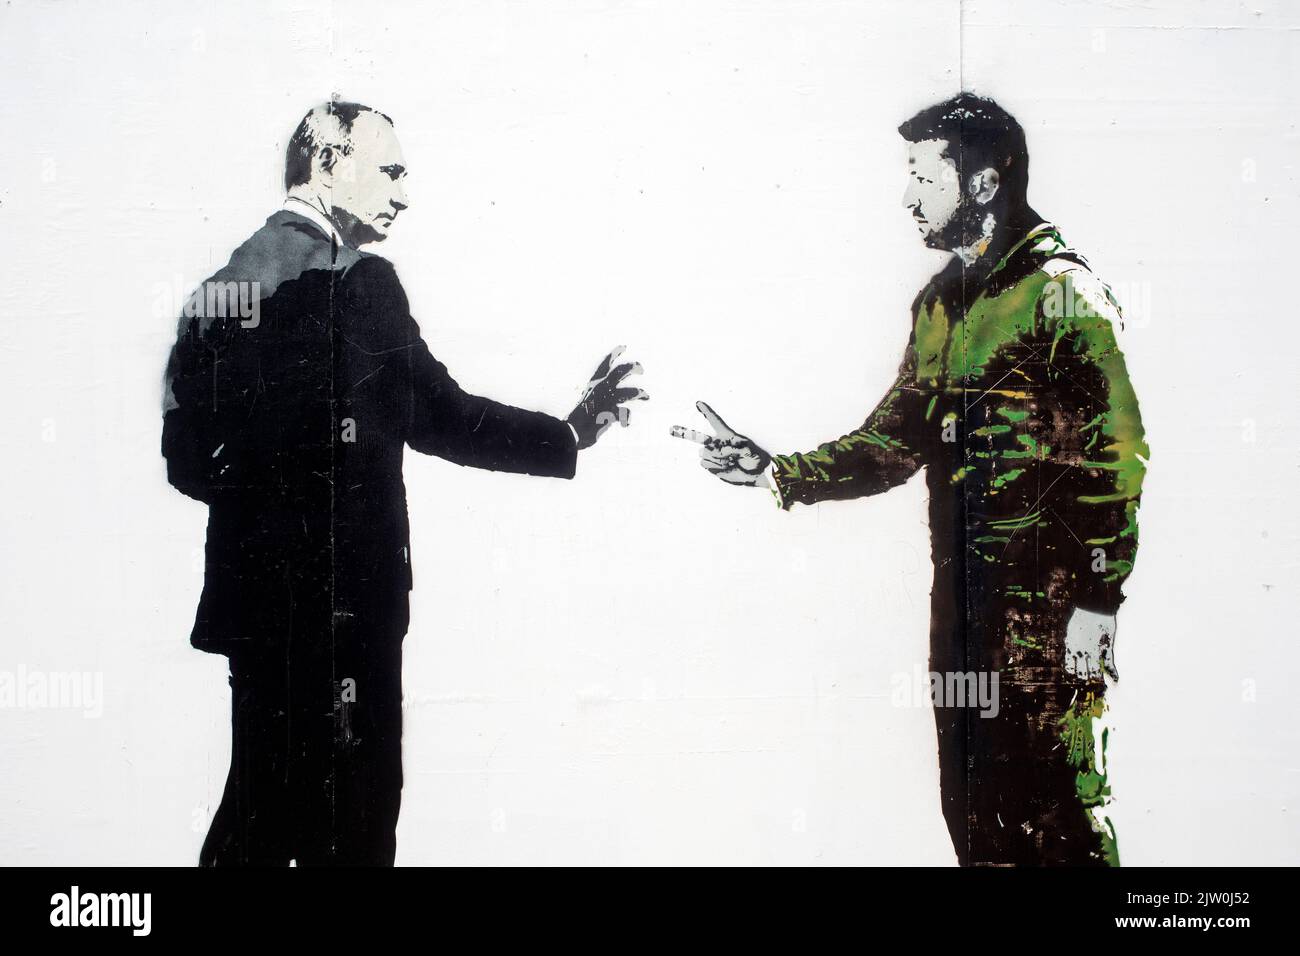 Graffiti  depicts Vladimir Putin and Volodymyr Zelensky who are currently at war following Russia's invasion of  Ukraine . Stock Photo